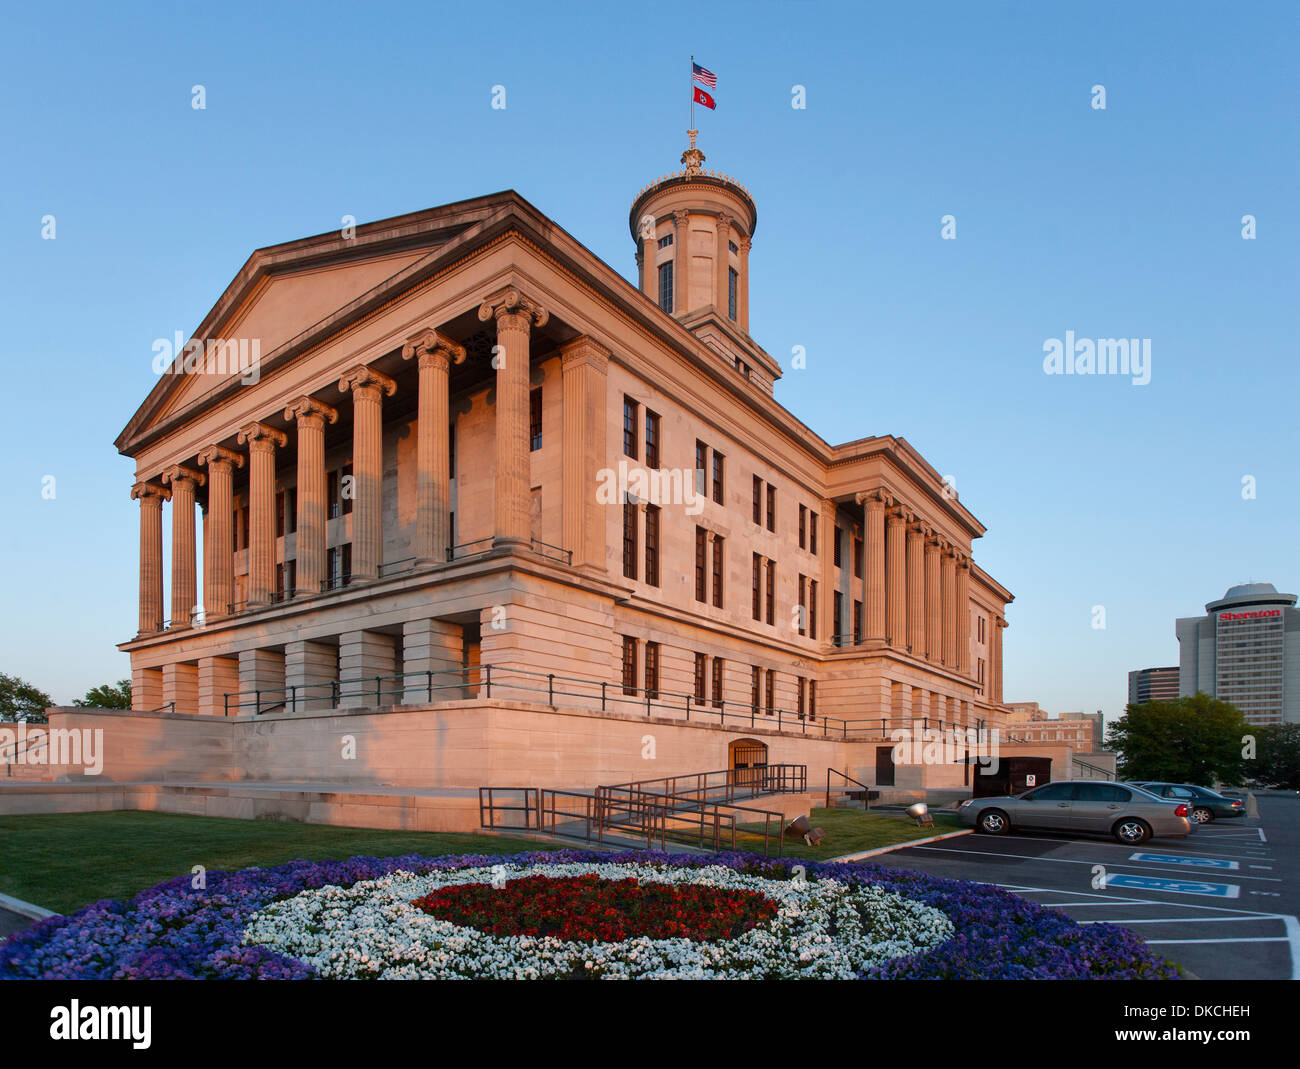 Tennessee Capital Building in Nashville, TN. Designed by William Strickland, noted Philadelphia architect. Stock Photo